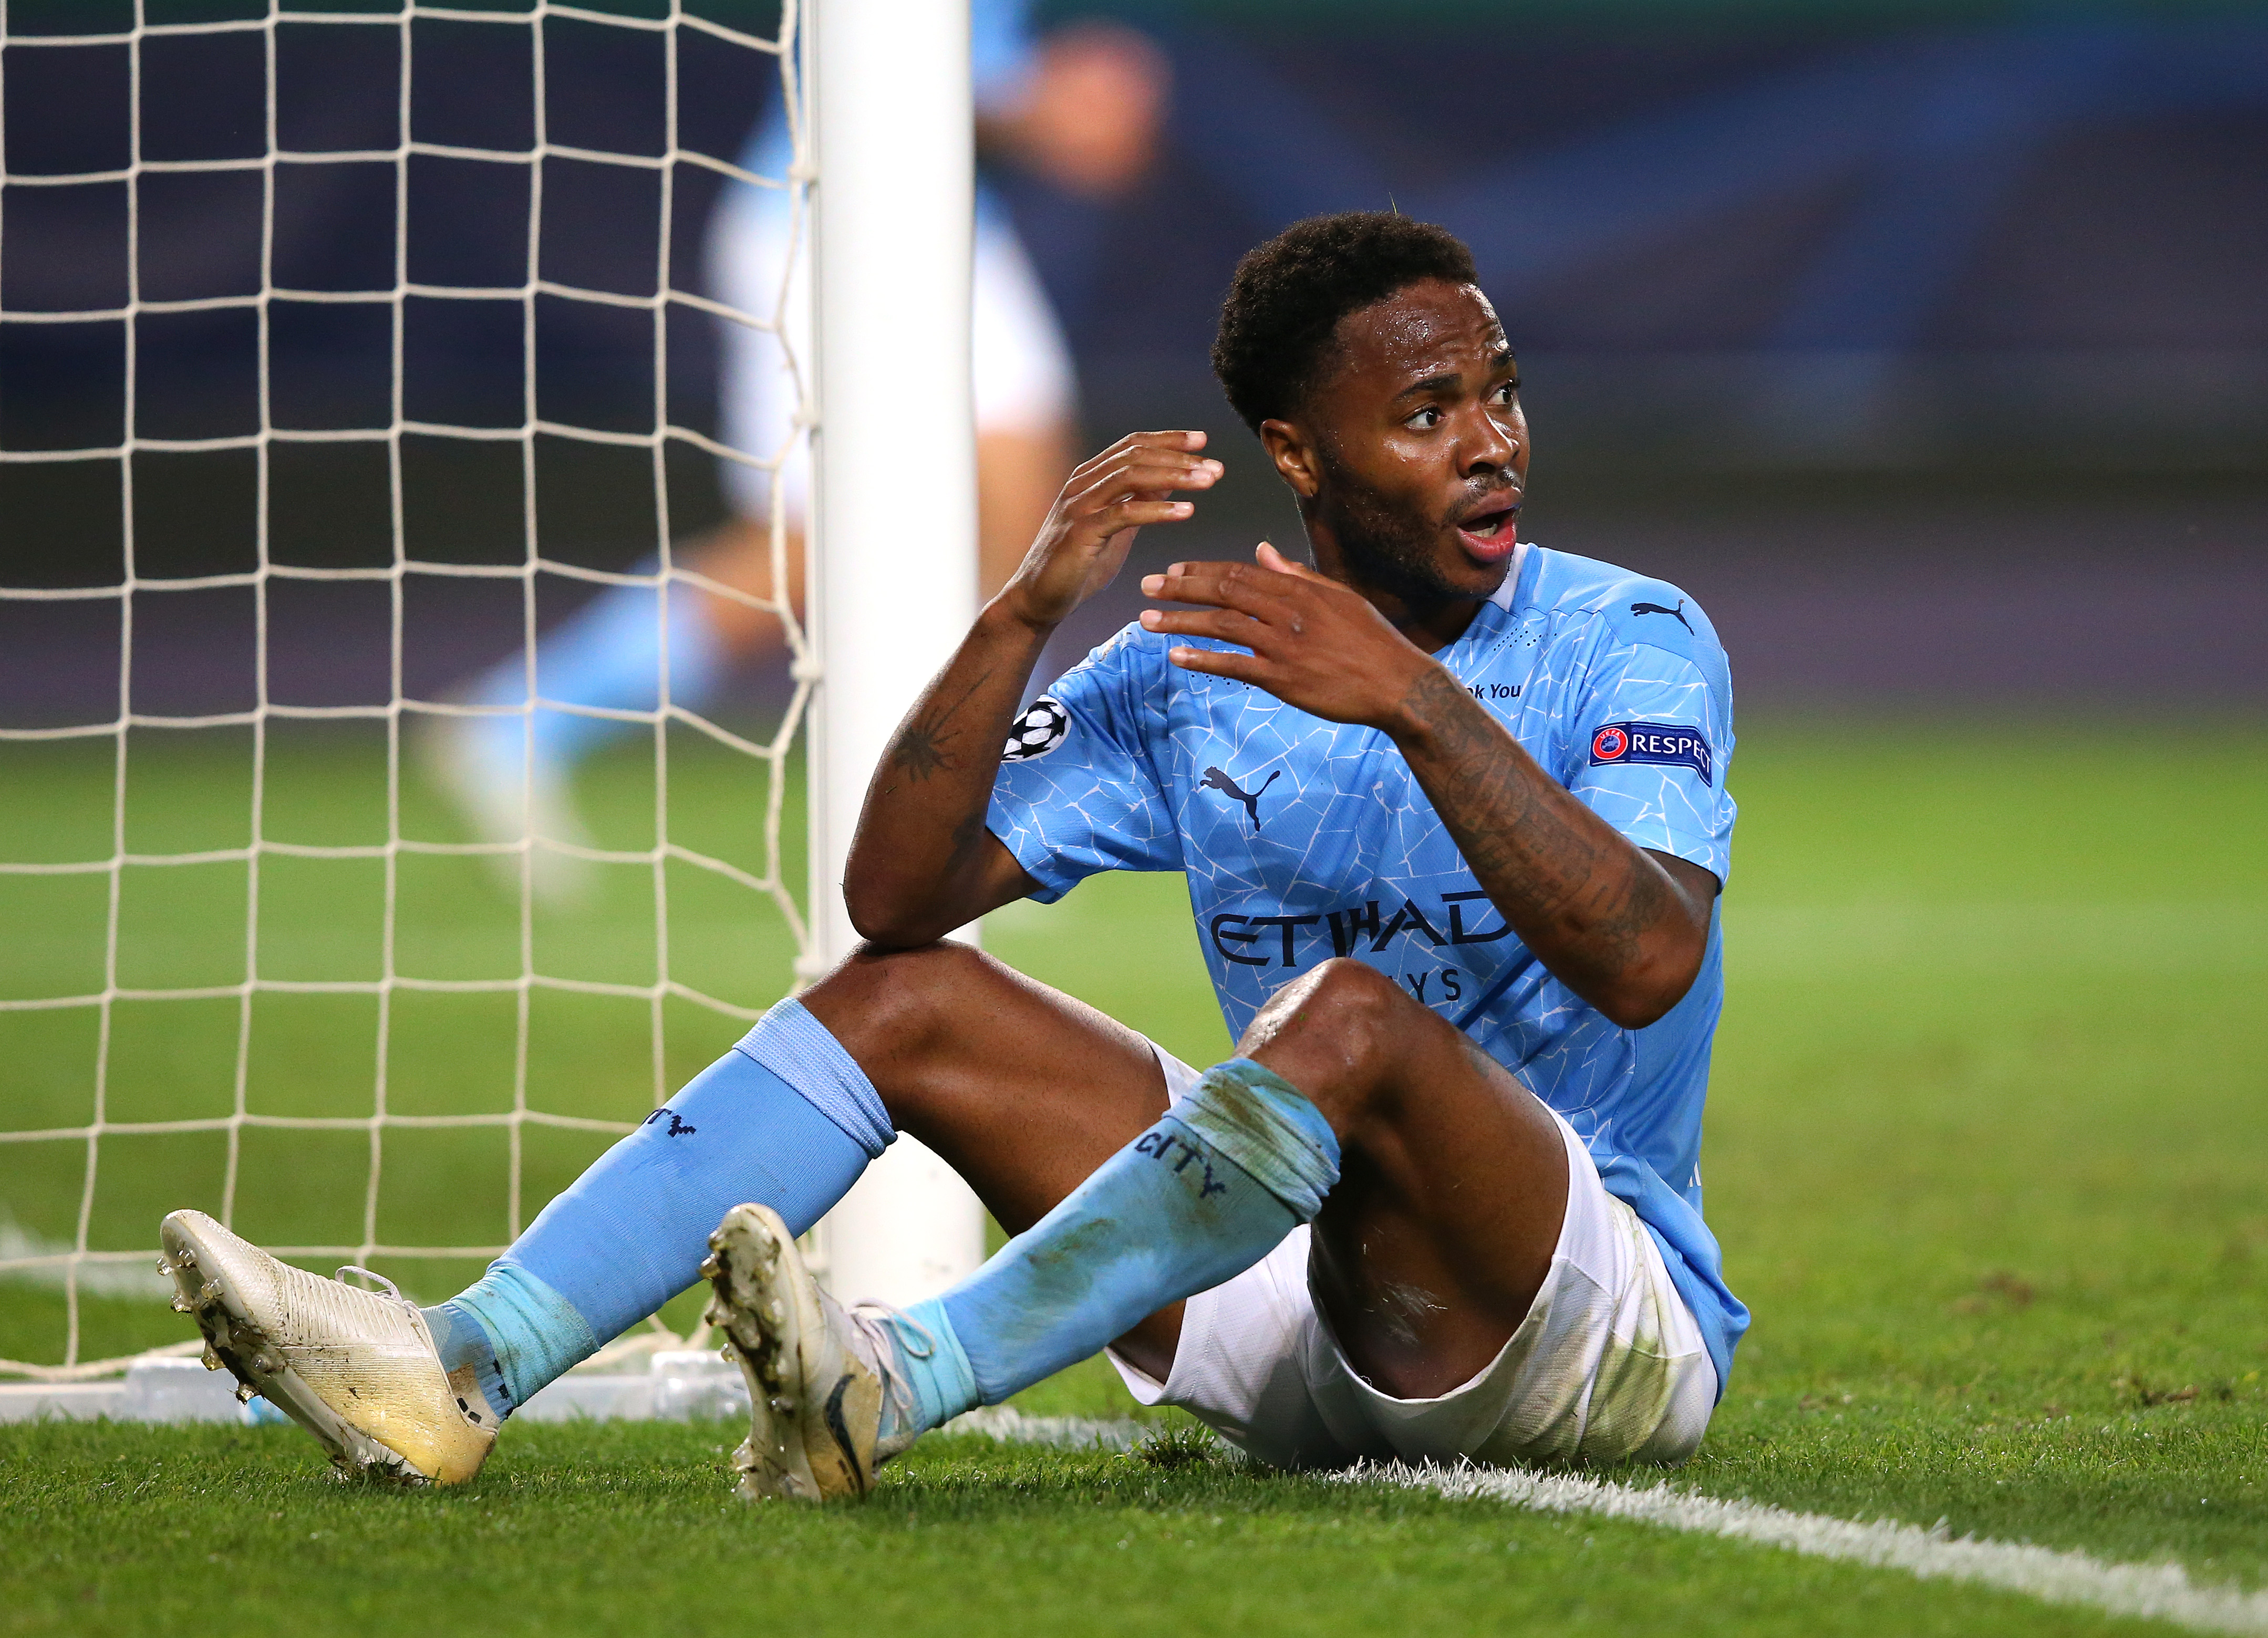 Raheem Sterling S Miss Might Be Worst In Champions League History Insidehook